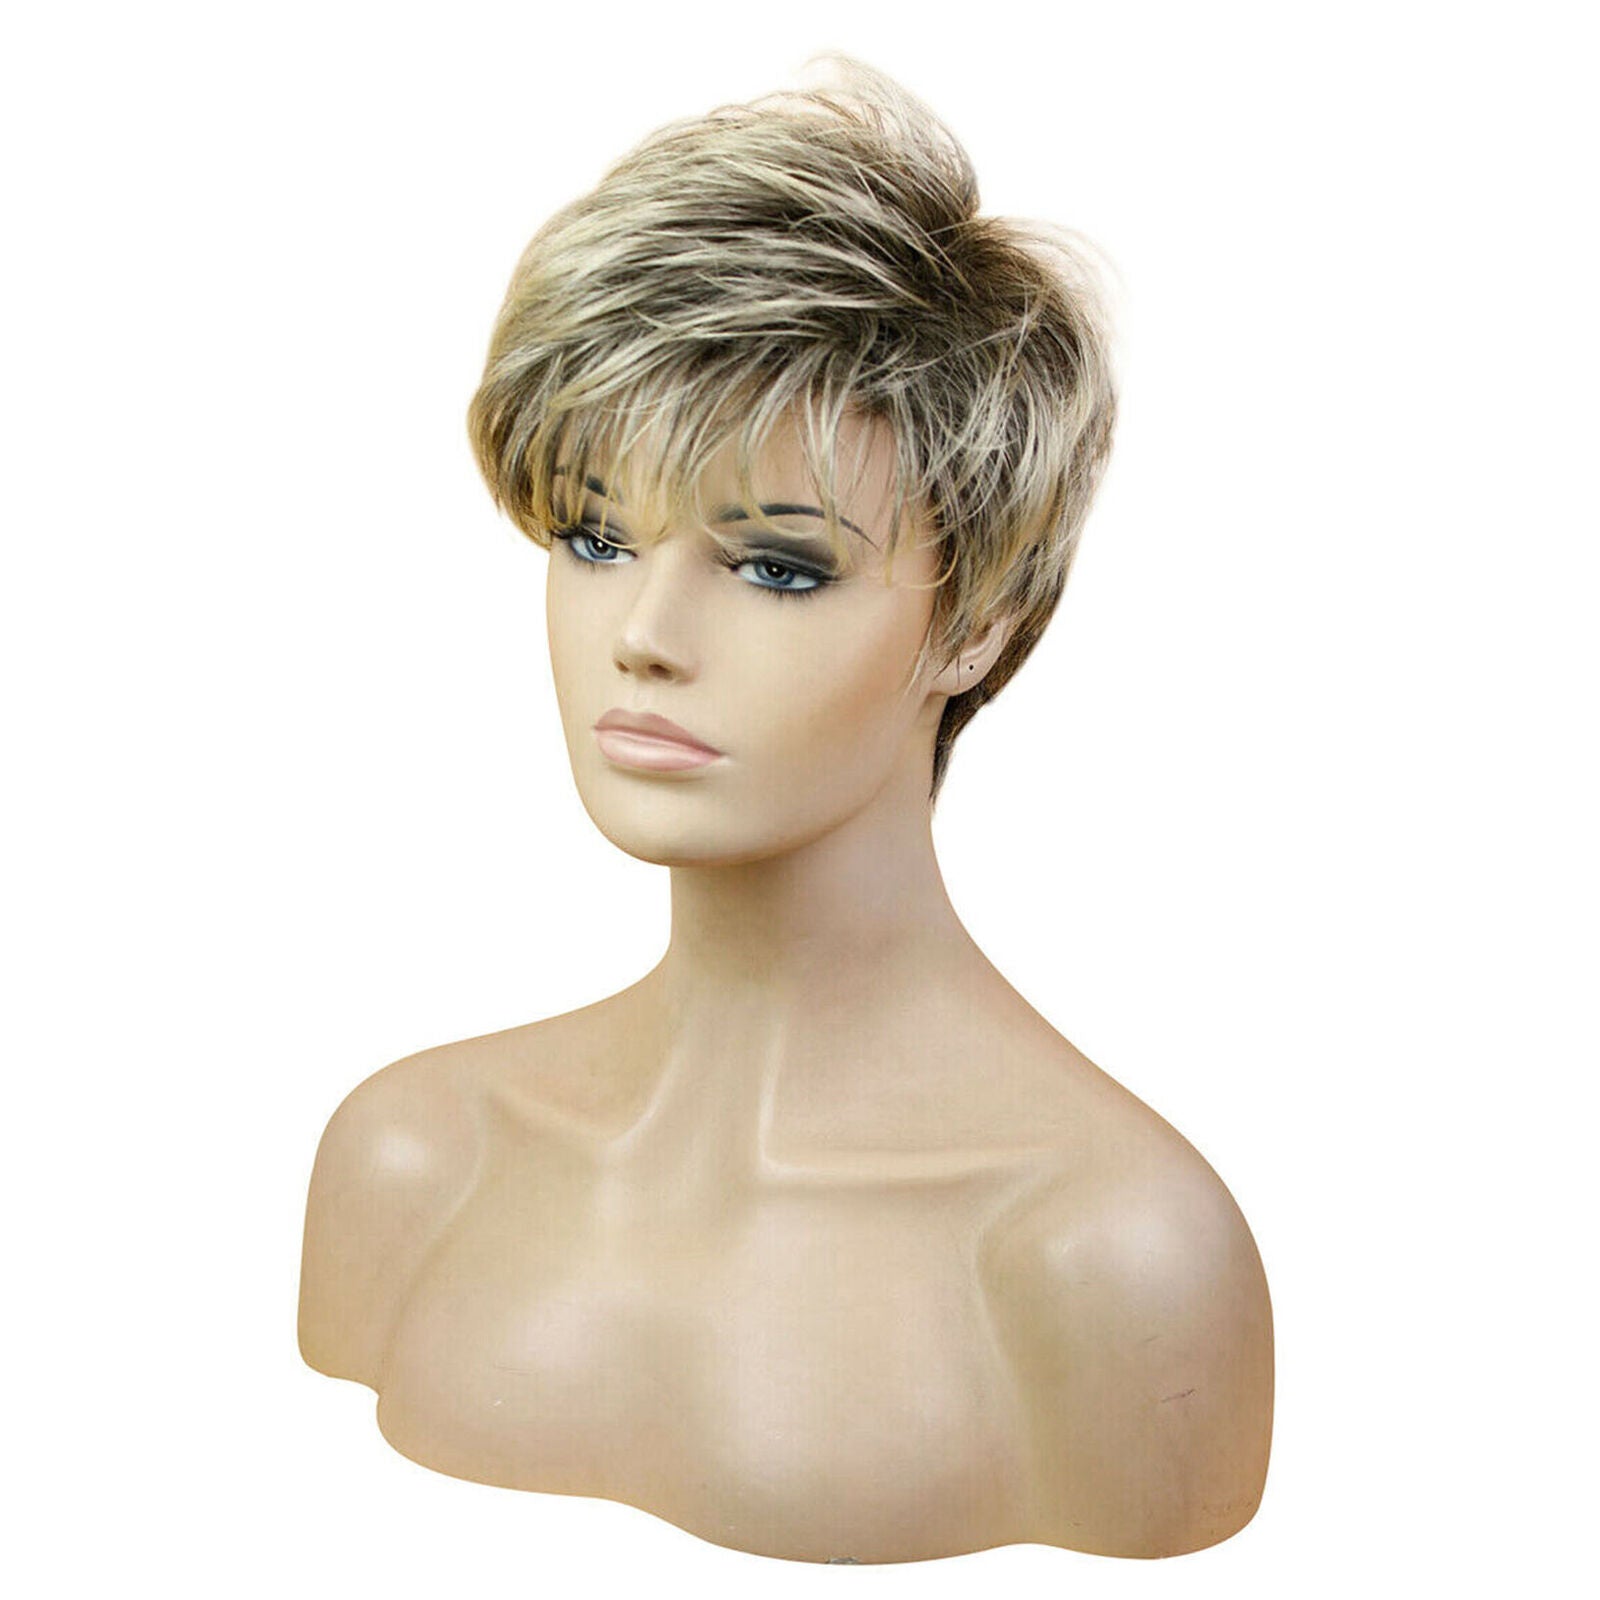 Fashion 5" Short Fluffy Wig Pixie Cut Hair Synthetic Ombre Wigs For Women Ladies